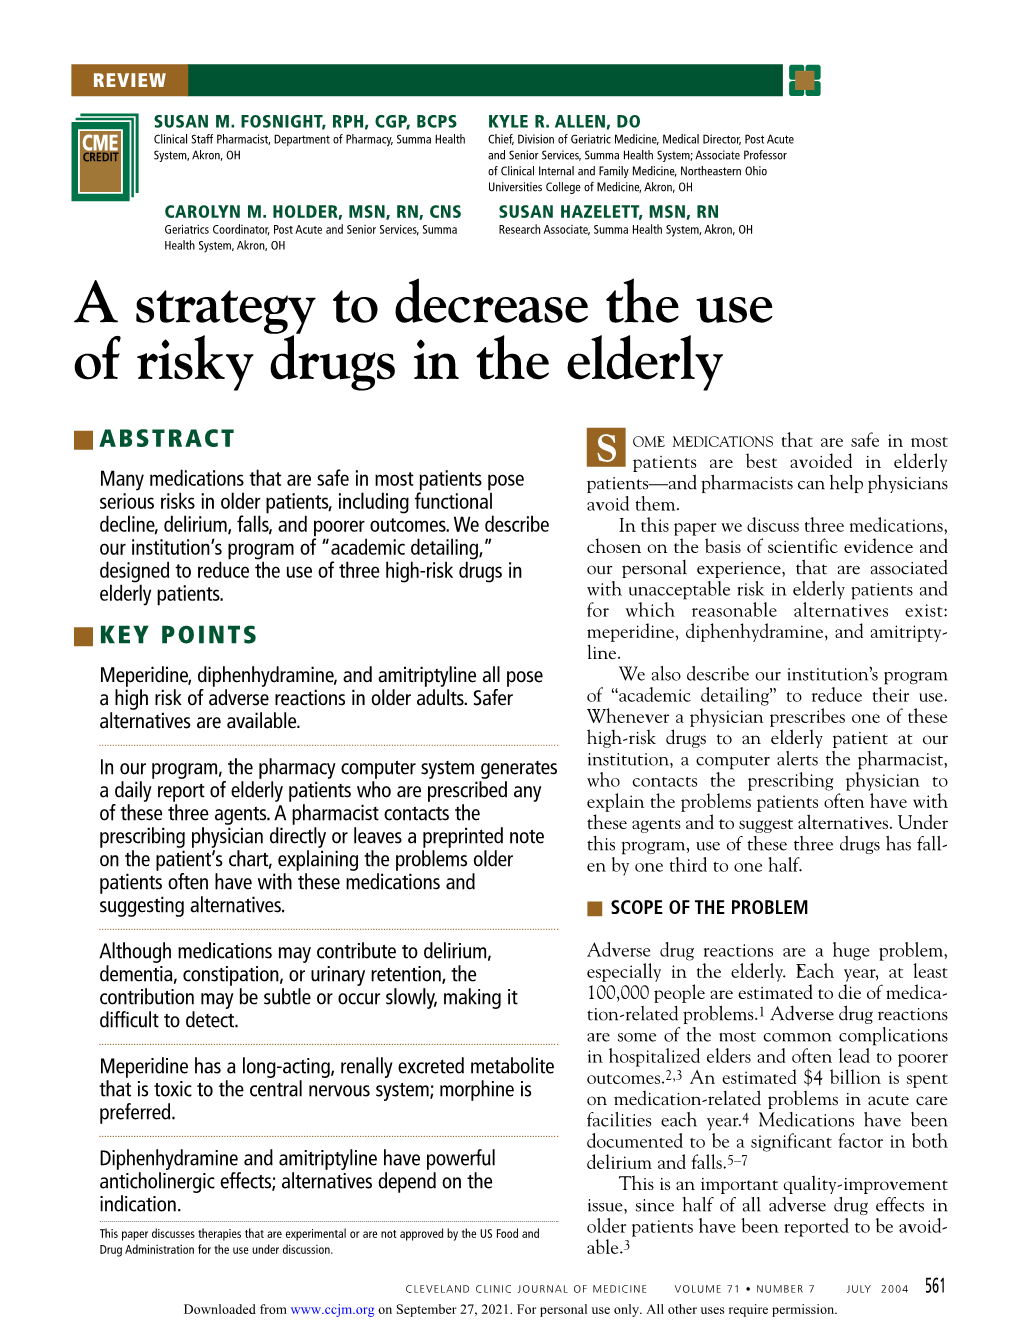 A Strategy to Decrease the Use of Risky Drugs in the Elderly